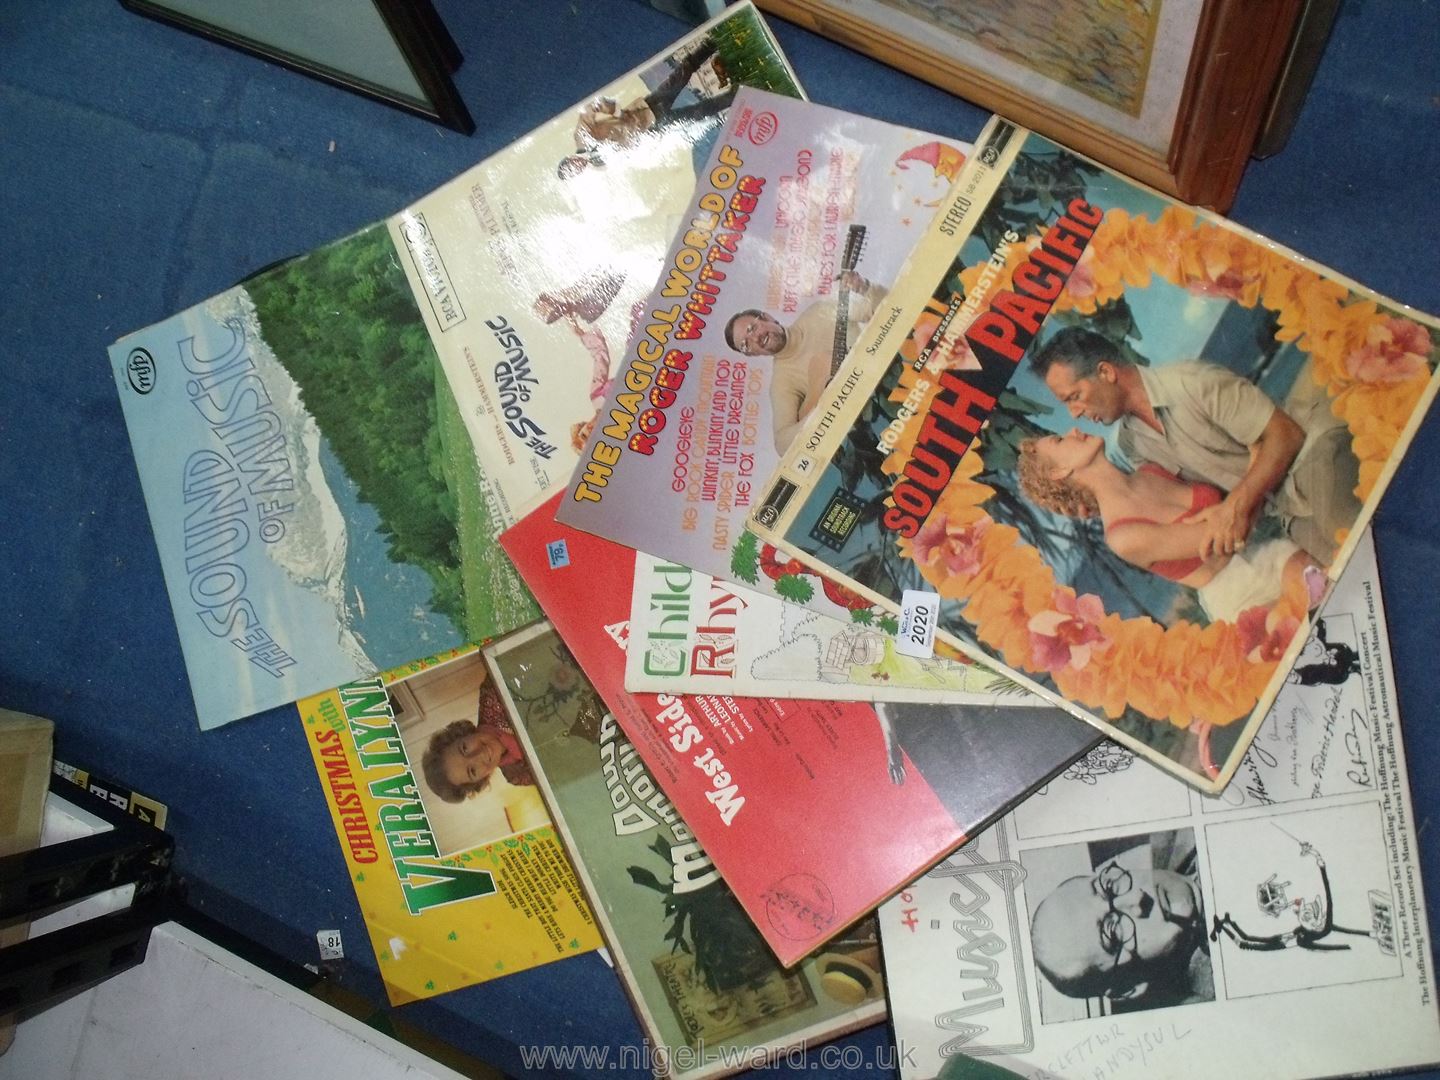 A bag of 78's records to include Vera Lynn, The Sound of Music, West Side Story etc.